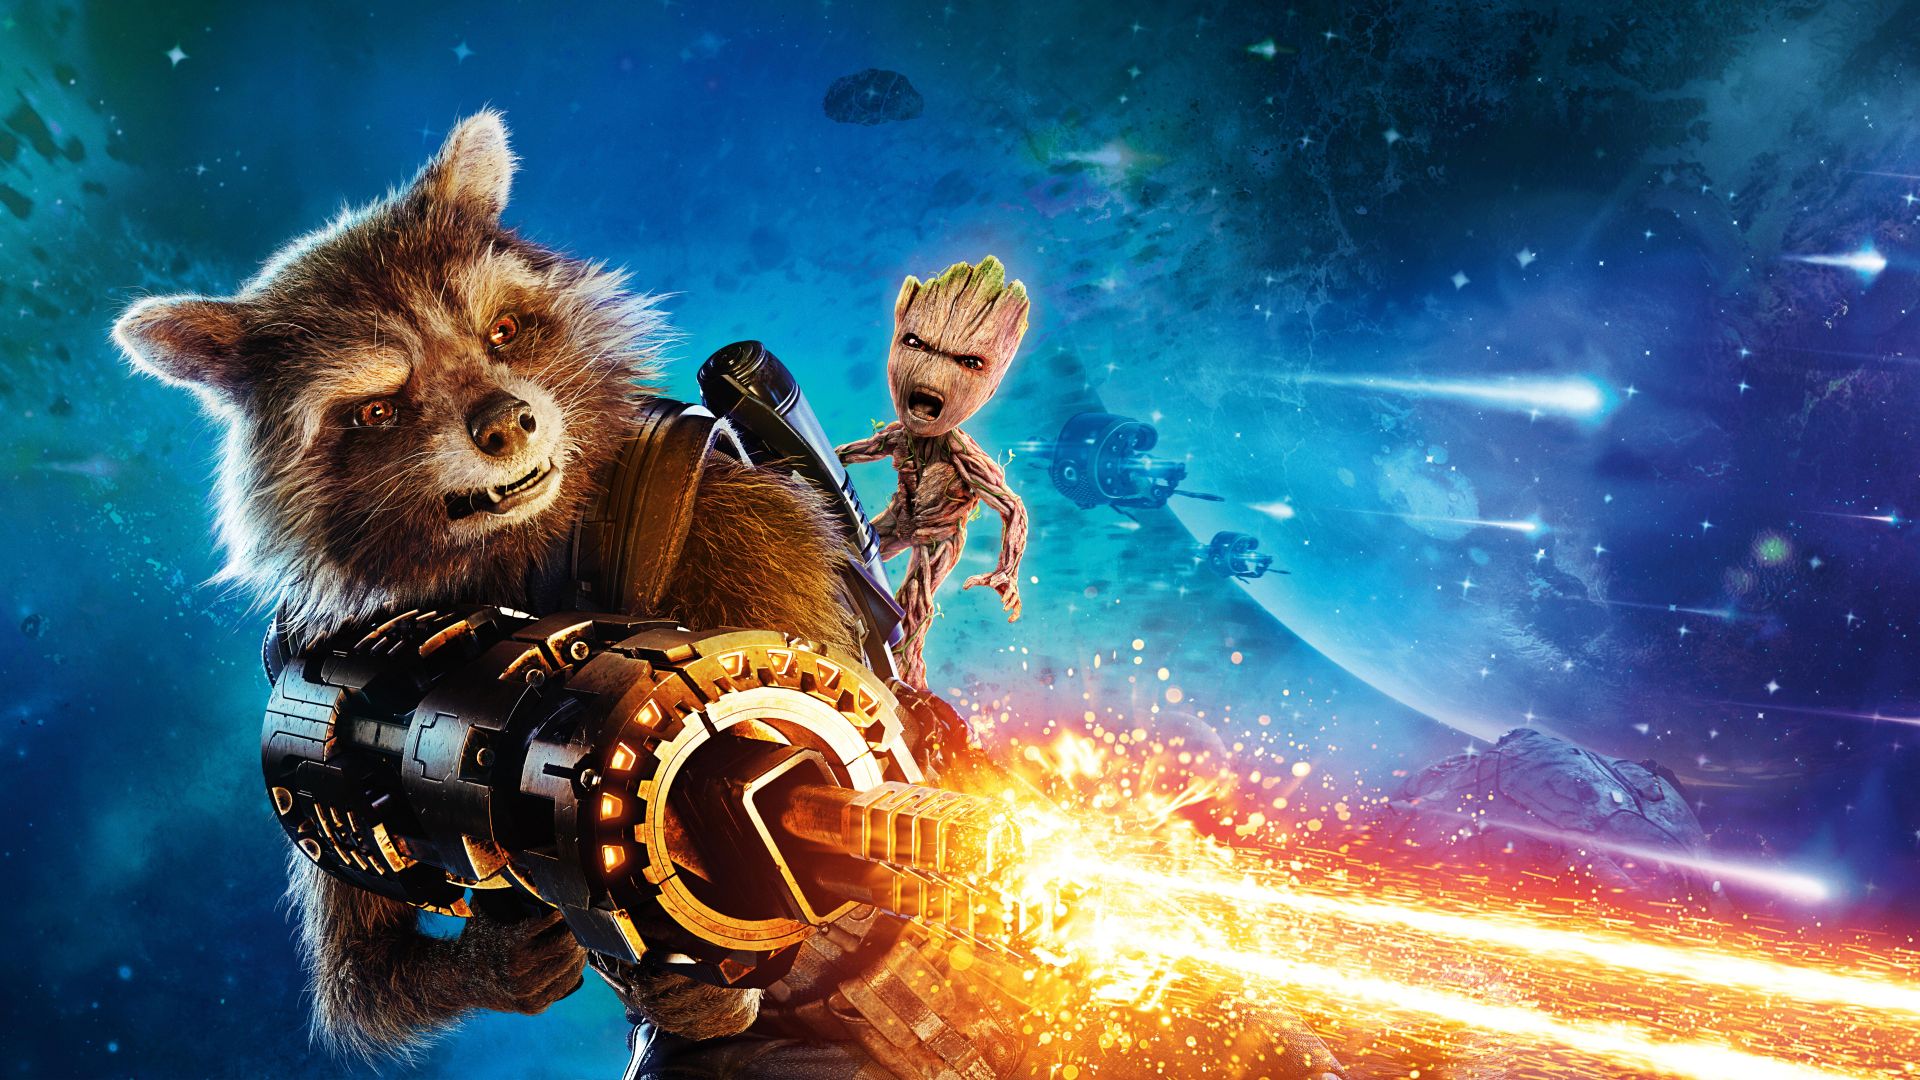 Desktop Wallpaper Baby Groot And Rocket Raccoon, Guardians Of The Galaxy  Vol 2, Movie, 4k, 8k, Hd Image, Picture, Background, Rrwigd